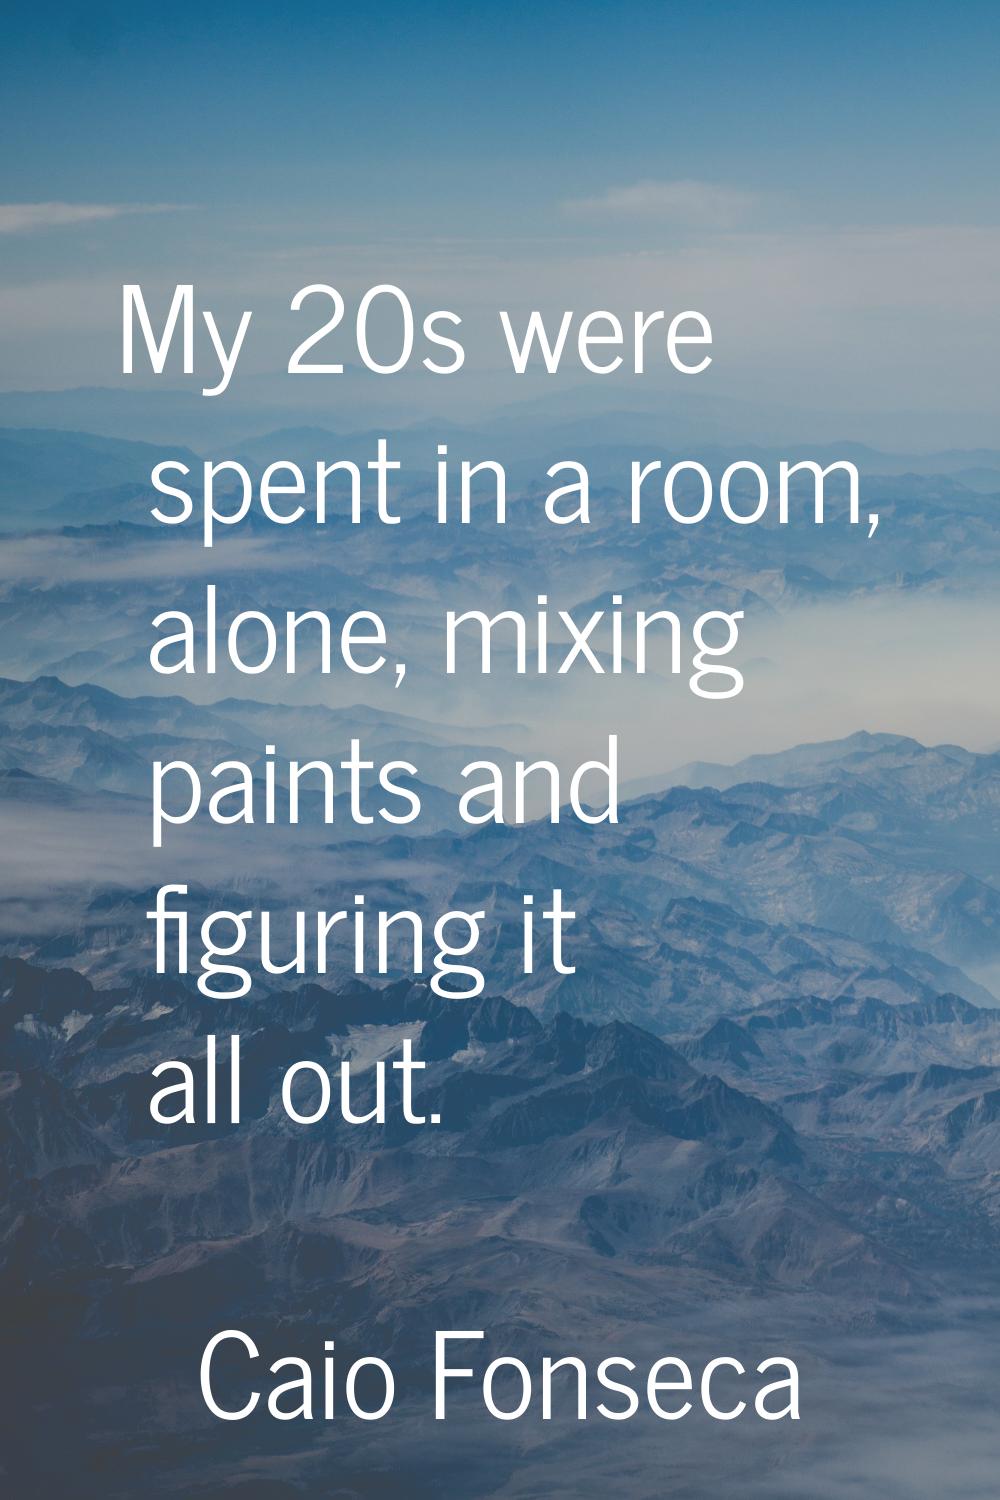 My 20s were spent in a room, alone, mixing paints and figuring it all out.